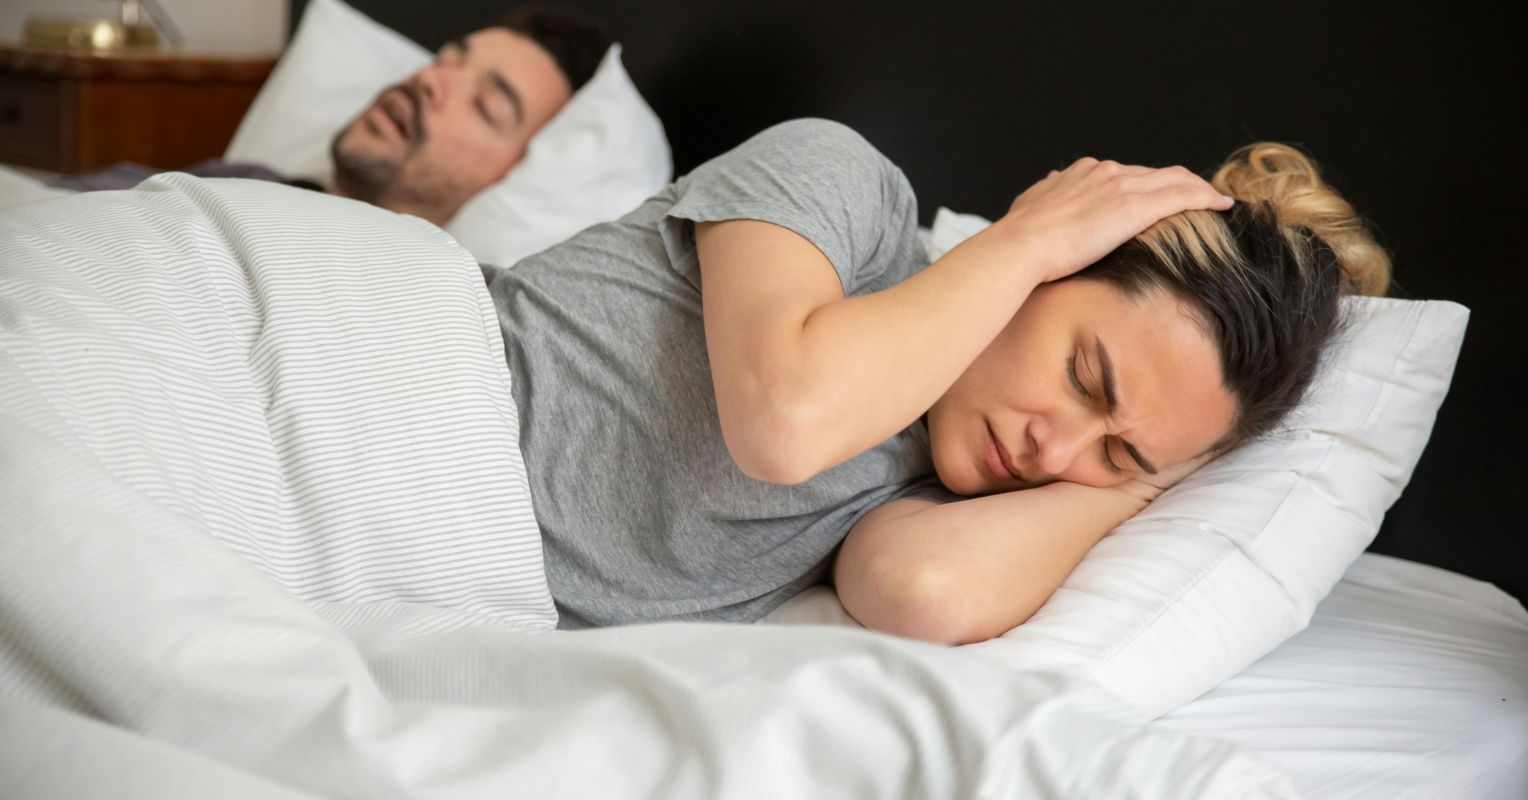 Is Worry Over Your Relationship Keeping You Up at Night?